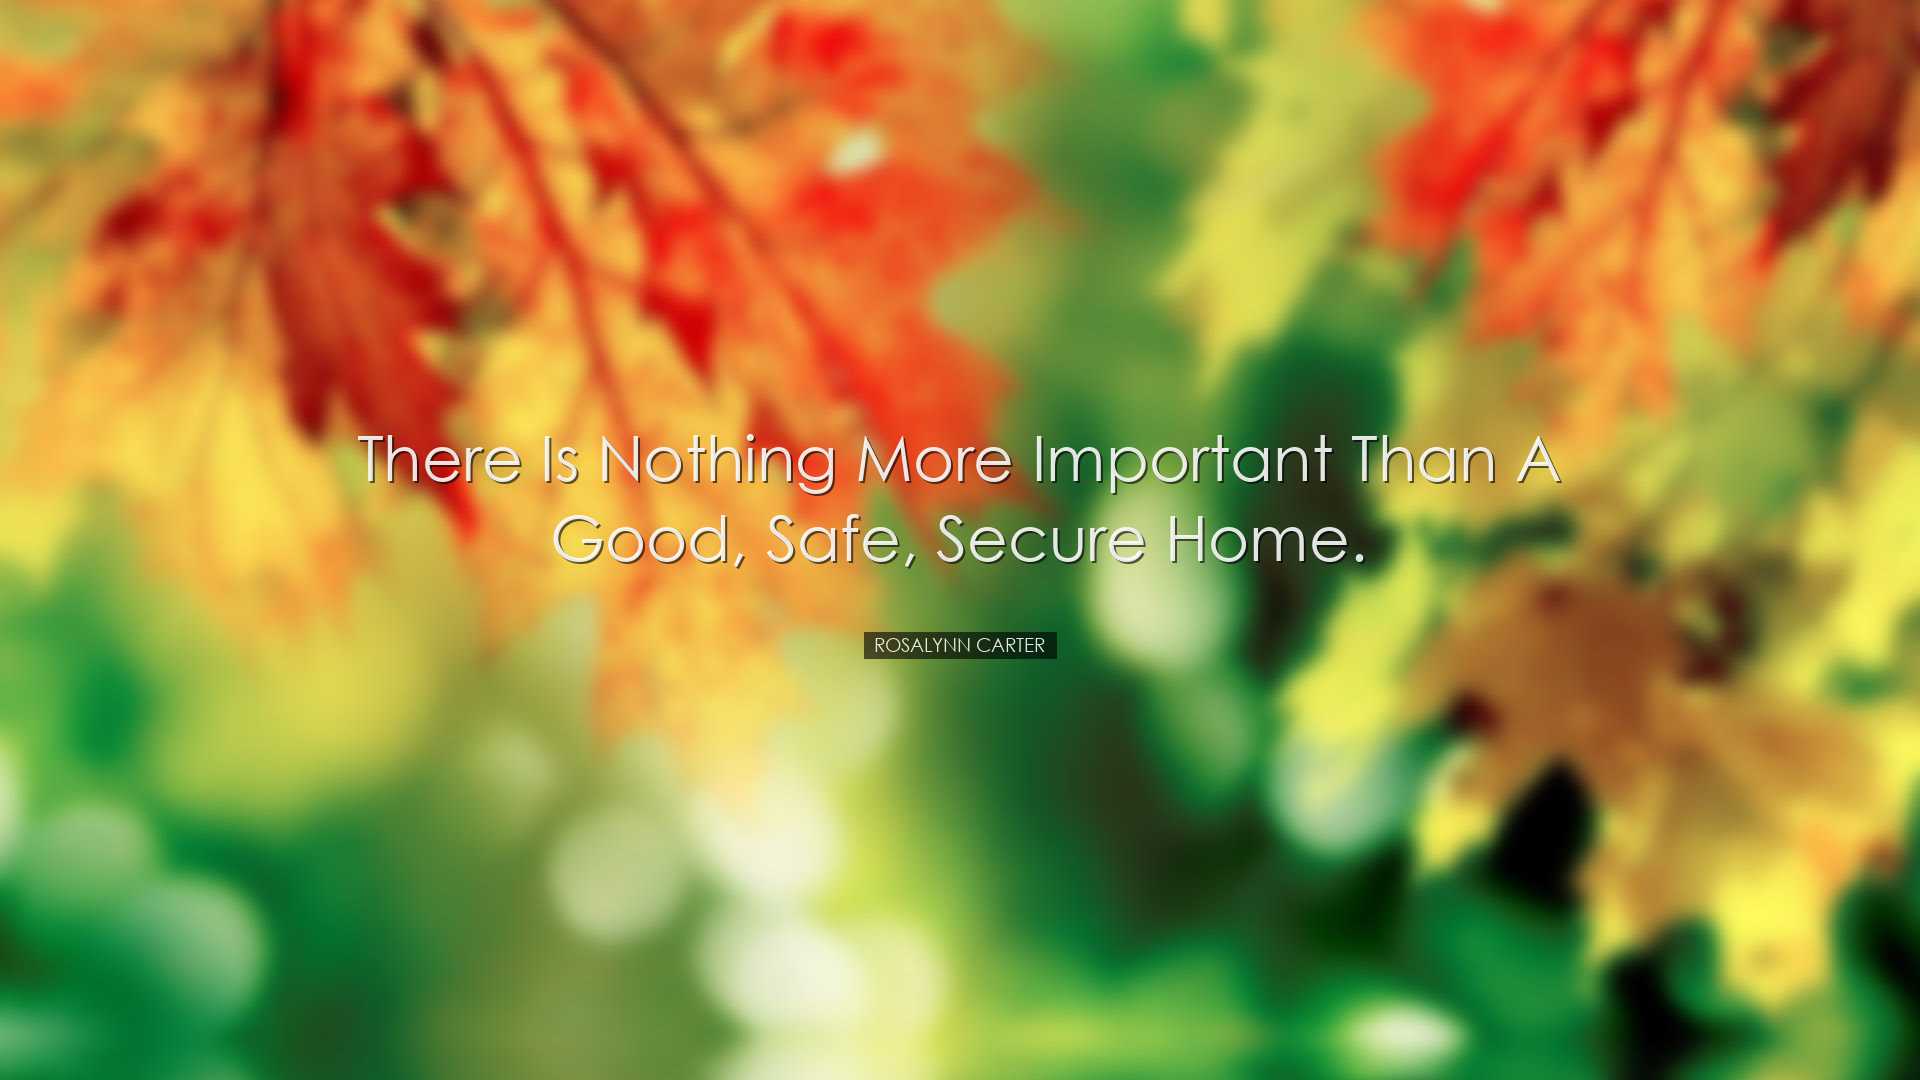 There is nothing more important than a good, safe, secure home. -